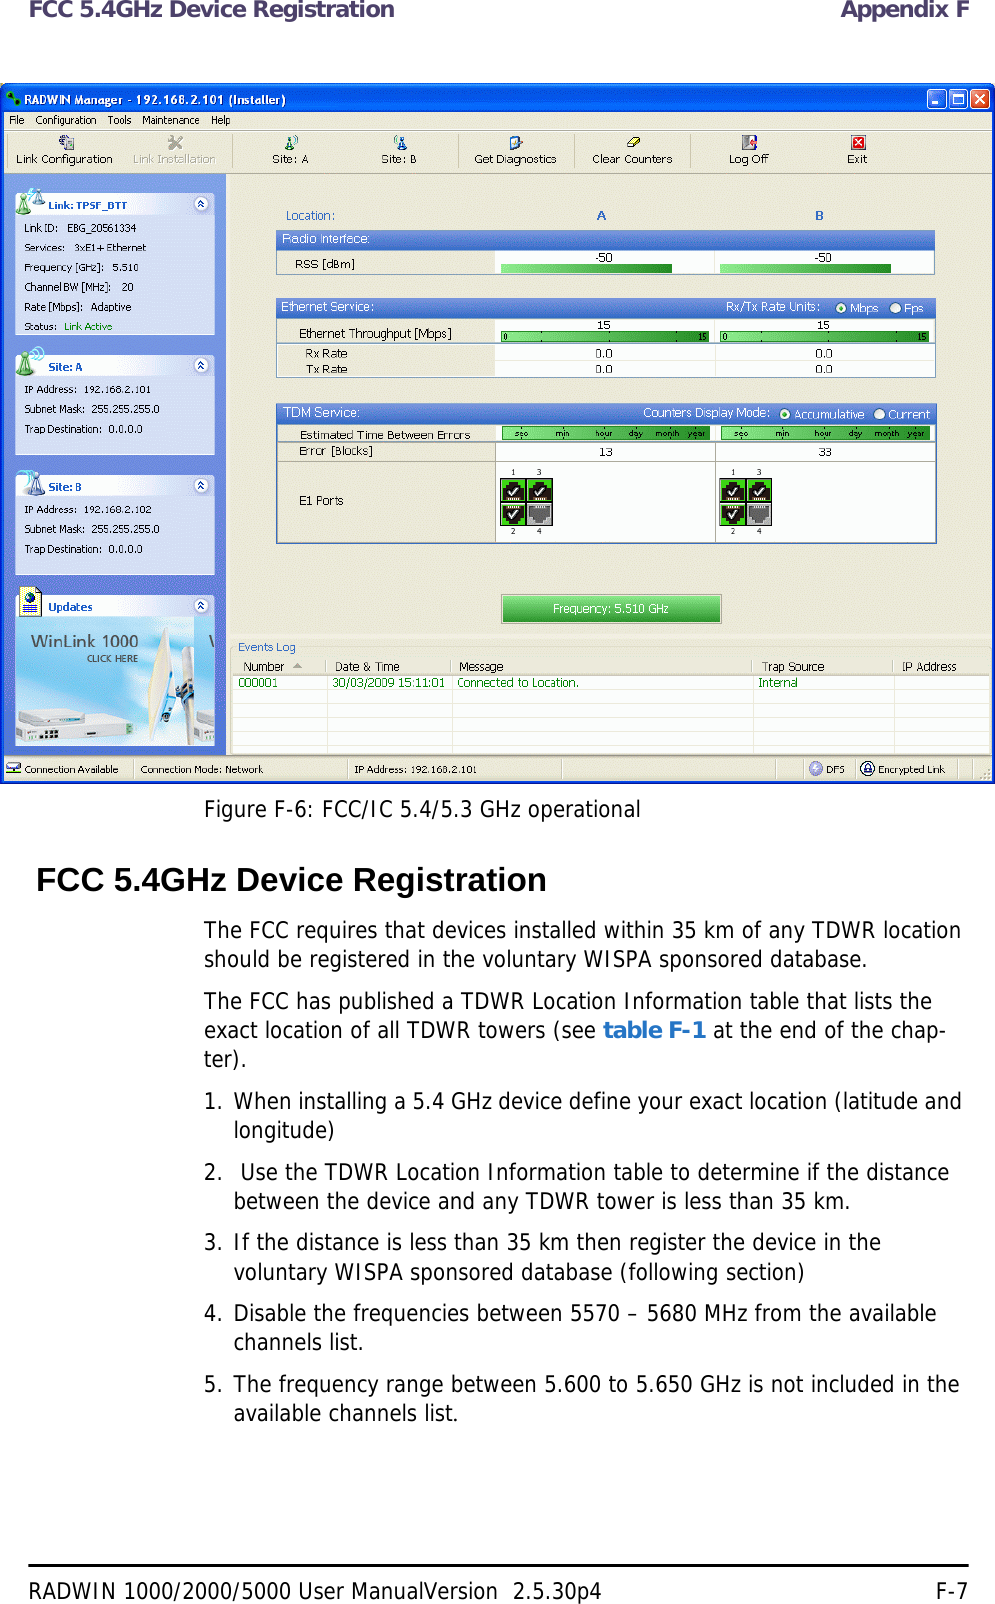 FCC 5.4GHz Device Registration Appendix FRADWIN 1000/2000/5000 User ManualVersion  2.5.30p4 F-7Figure F-6: FCC/IC 5.4/5.3 GHz operational FCC 5.4GHz Device RegistrationThe FCC requires that devices installed within 35 km of any TDWR location should be registered in the voluntary WISPA sponsored database. The FCC has published a TDWR Location Information table that lists the exact location of all TDWR towers (see table F-1 at the end of the chap-ter).1. When installing a 5.4 GHz device define your exact location (latitude and longitude)2.  Use the TDWR Location Information table to determine if the distance between the device and any TDWR tower is less than 35 km.3. If the distance is less than 35 km then register the device in the voluntary WISPA sponsored database (following section)4. Disable the frequencies between 5570 – 5680 MHz from the available channels list.5. The frequency range between 5.600 to 5.650 GHz is not included in the available channels list.